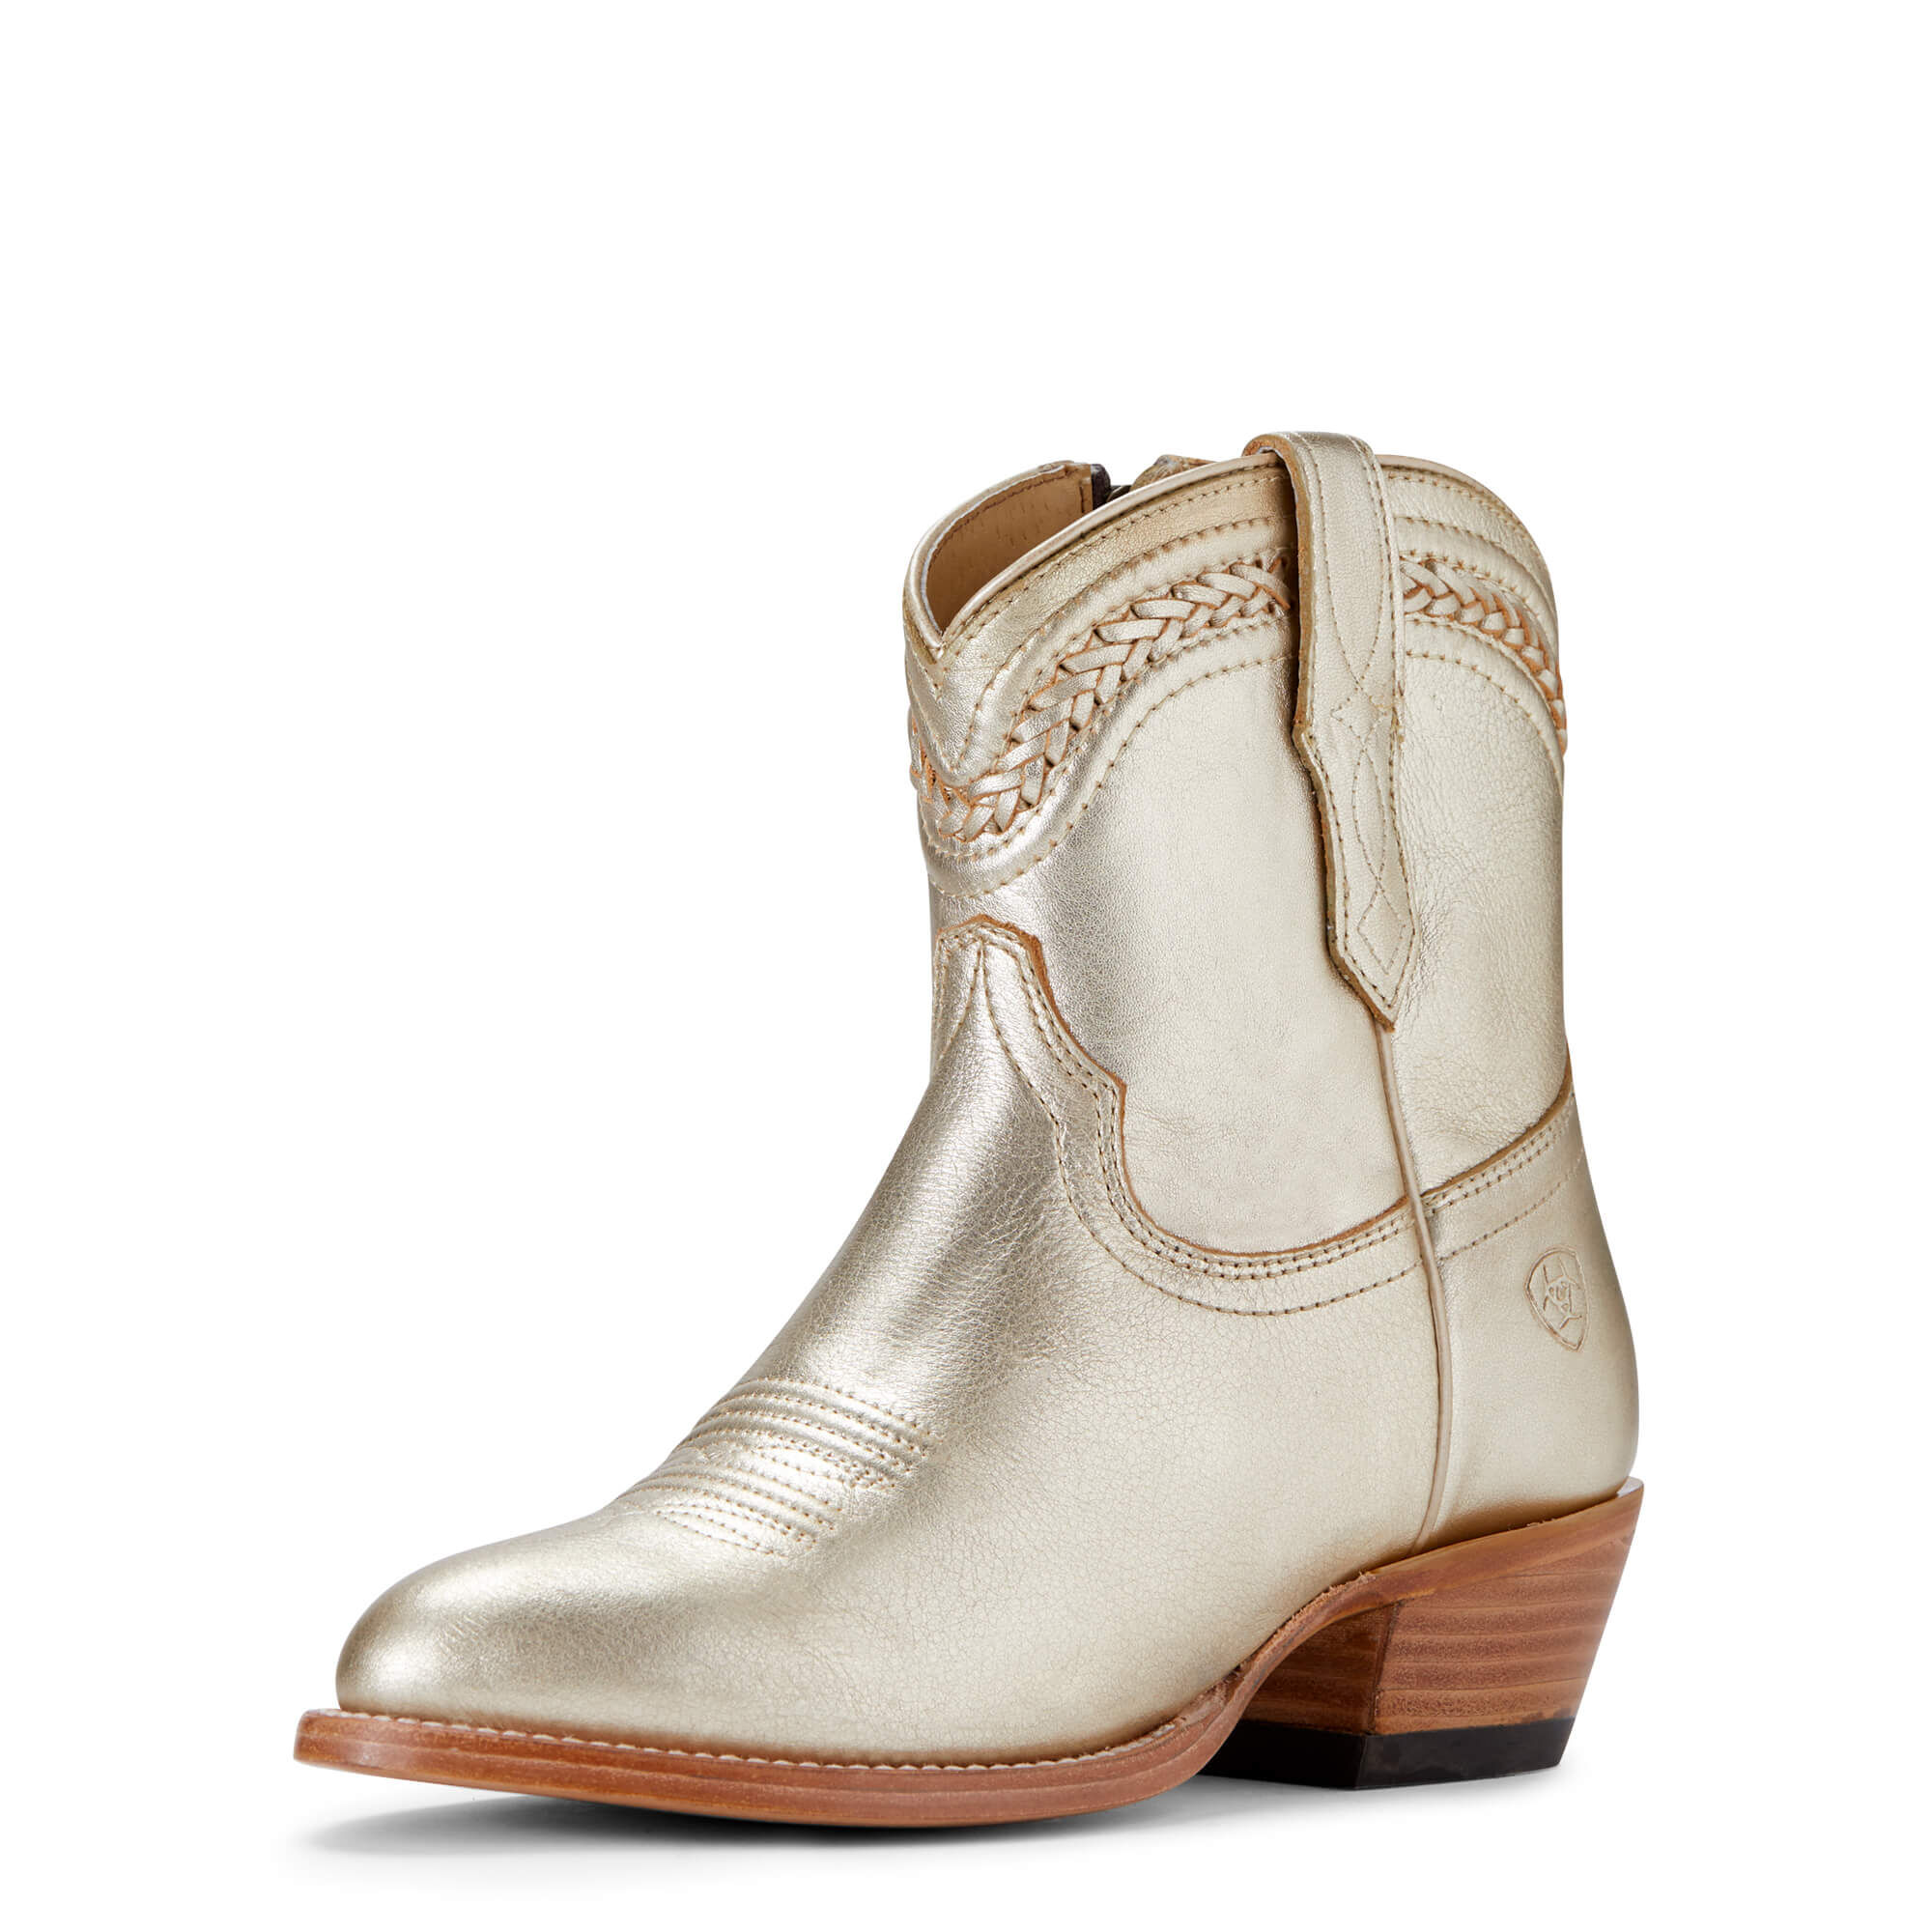 Women's Cowboy Boots Clearance | Ariat